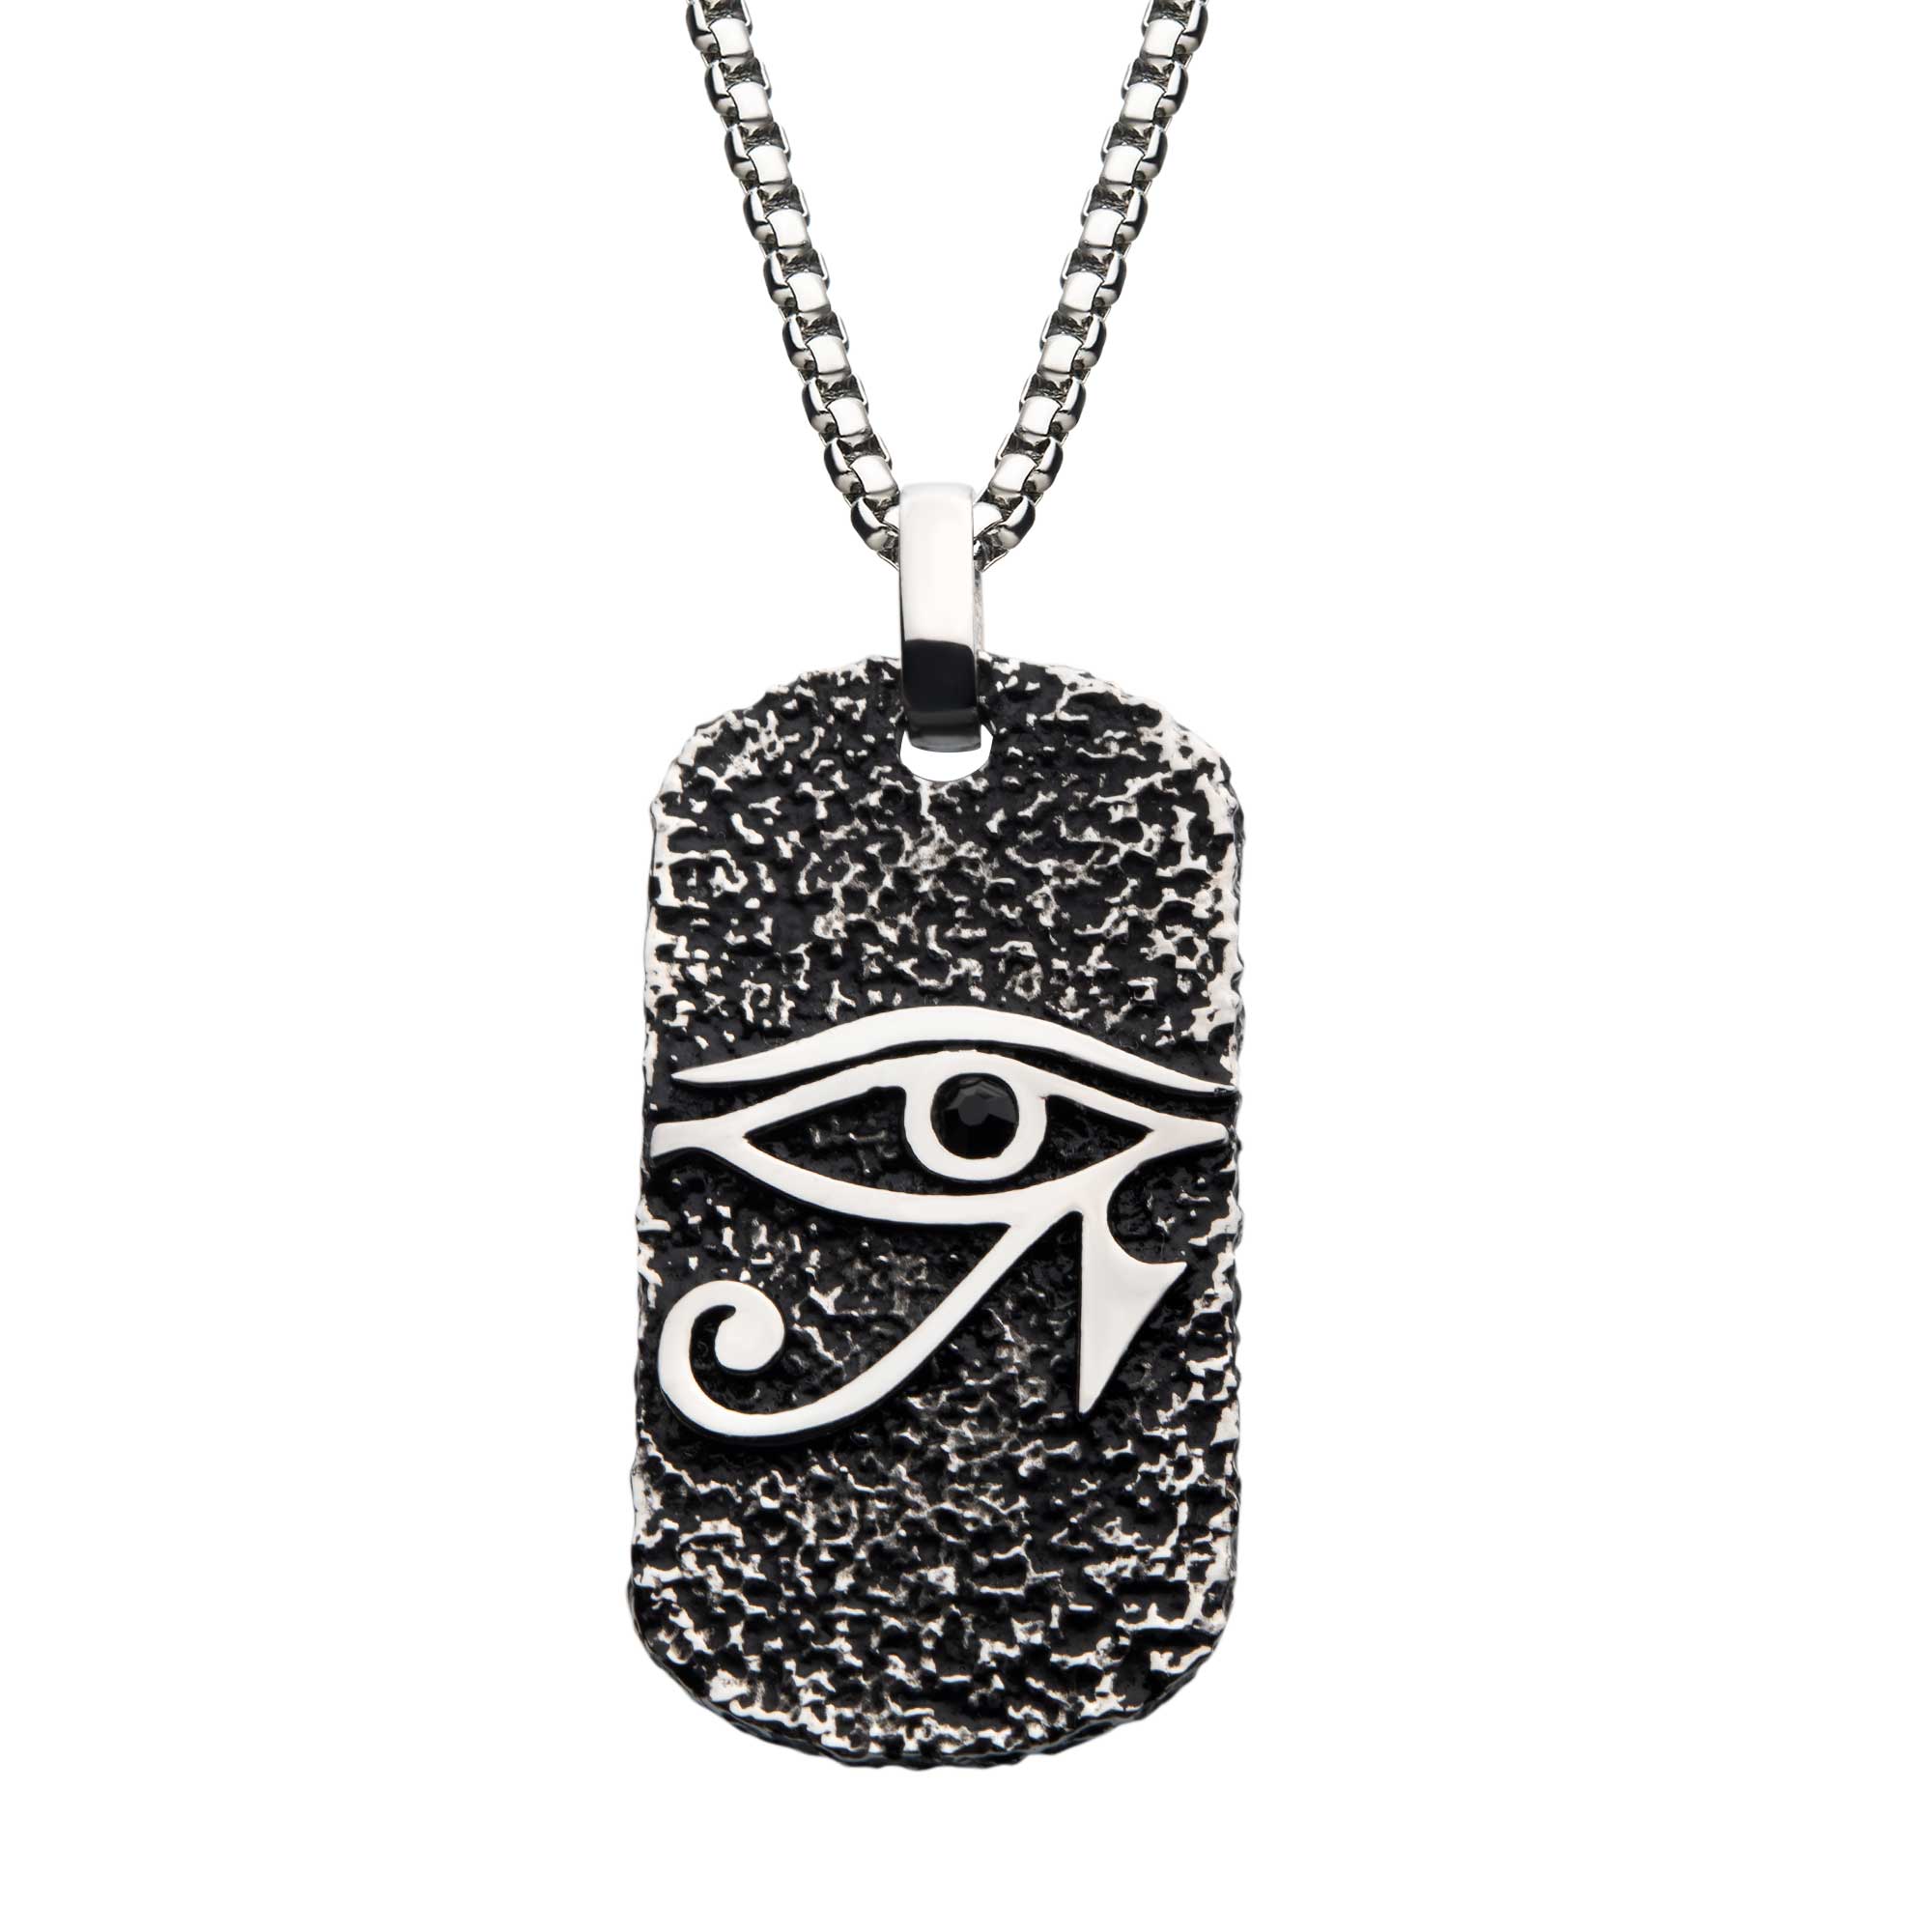 Black Oxidized Stainless Steel with Black CZ Eye of Horus Dog Tag Pendant, with Steel Box Chain Ken Walker Jewelers Gig Harbor, WA